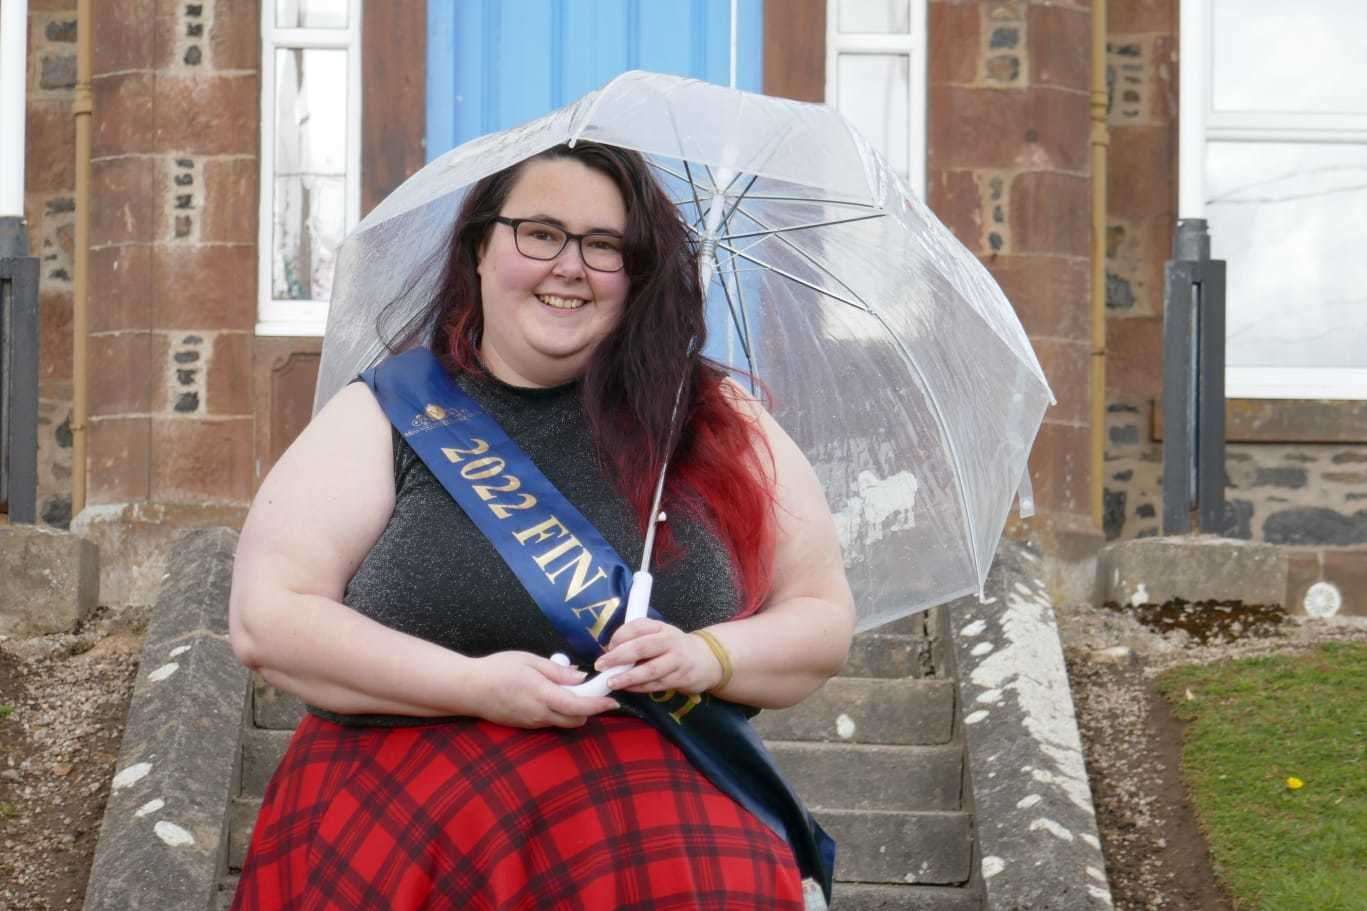 Kirsty Brown will take to the stage to compete in the Miss Voluptuous UK pageant.